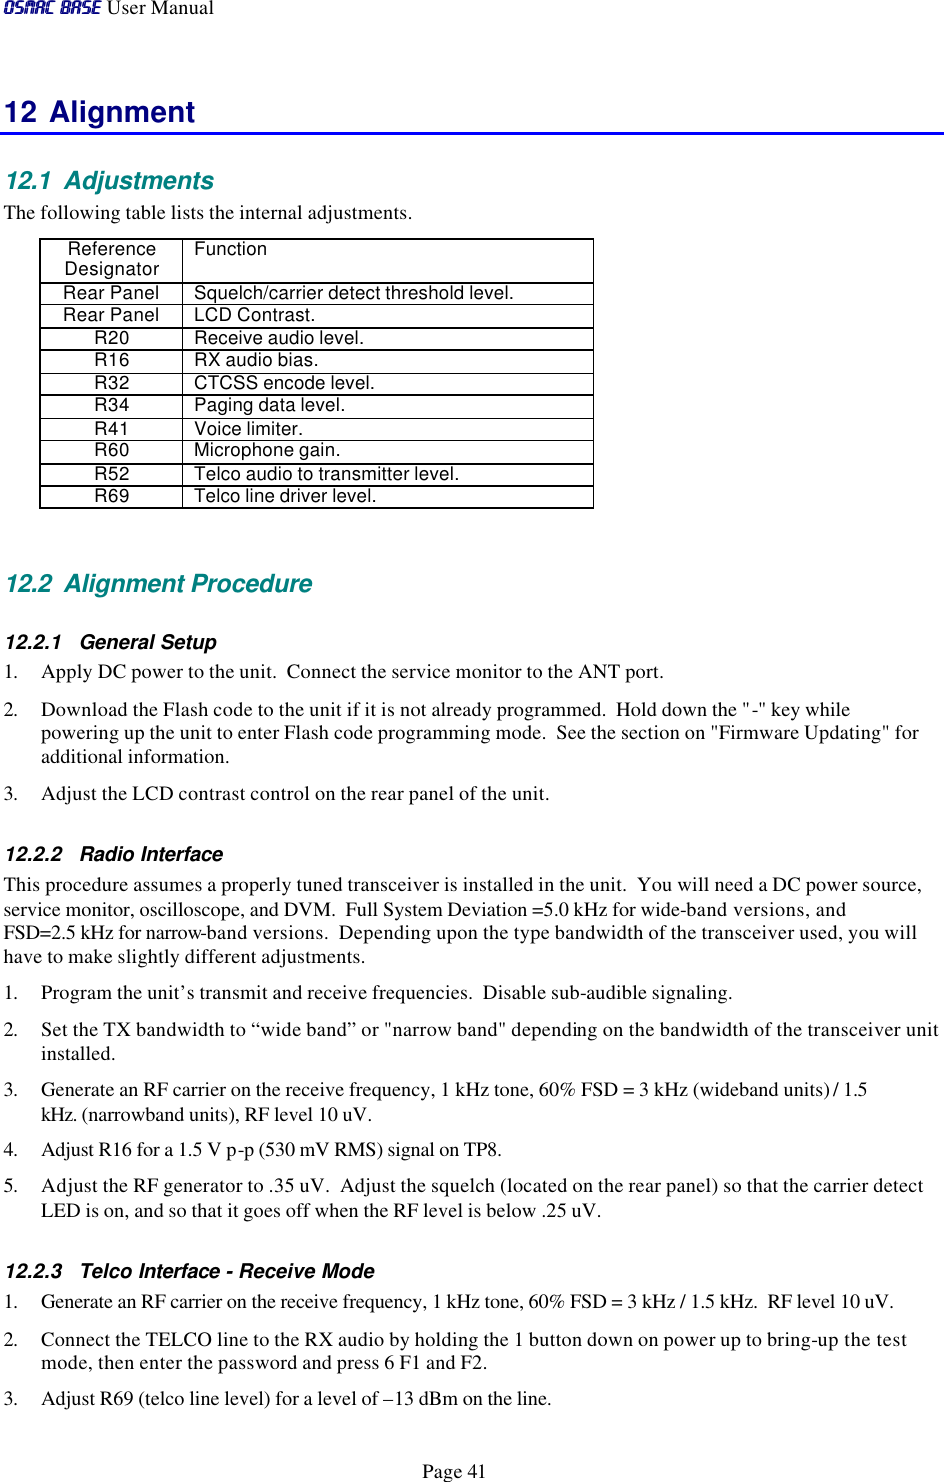 OSMAC BaseOSMAC Base User Manual      Page 41 12 Alignment 12.1 Adjustments The following table lists the internal adjustments.   Reference Designator Function  Rear Panel Squelch/carrier detect threshold level.  Rear Panel LCD Contrast.  R20 Receive audio level.   R16 RX audio bias.   R32 CTCSS encode level.   R34 Paging data level.   R41 Voice limiter.   R60 Microphone gain.   R52 Telco audio to transmitter level.  R69 Telco line driver level.    12.2 Alignment Procedure 12.2.1 General Setup 1. Apply DC power to the unit.  Connect the service monitor to the ANT port.  2. Download the Flash code to the unit if it is not already programmed.  Hold down the &quot;-&quot; key while powering up the unit to enter Flash code programming mode.  See the section on &quot;Firmware Updating&quot; for additional information. 3. Adjust the LCD contrast control on the rear panel of the unit. 12.2.2 Radio Interface This procedure assumes a properly tuned transceiver is installed in the unit.  You will need a DC power source, service monitor, oscilloscope, and DVM.  Full System Deviation =5.0 kHz for wide-band versions, and FSD=2.5 kHz for narrow-band versions.  Depending upon the type bandwidth of the transceiver used, you will have to make slightly different adjustments.  1. Program the unit’s transmit and receive frequencies.  Disable sub-audible signaling.   2. Set the TX bandwidth to “wide band” or &quot;narrow band&quot; depending on the bandwidth of the transceiver unit installed.  3. Generate an RF carrier on the receive frequency, 1 kHz tone, 60% FSD = 3 kHz (wideband units) / 1.5 kHz. (narrowband units), RF level 10 uV. 4. Adjust R16 for a 1.5 V p-p (530 mV RMS) signal on TP8.  5. Adjust the RF generator to .35 uV.  Adjust the squelch (located on the rear panel) so that the carrier detect LED is on, and so that it goes off when the RF level is below .25 uV.  12.2.3 Telco Interface - Receive Mode 1. Generate an RF carrier on the receive frequency, 1 kHz tone, 60% FSD = 3 kHz / 1.5 kHz.  RF level 10 uV. 2. Connect the TELCO line to the RX audio by holding the 1 button down on power up to bring-up the test mode, then enter the password and press 6 F1 and F2. 3. Adjust R69 (telco line level) for a level of –13 dBm on the line.  